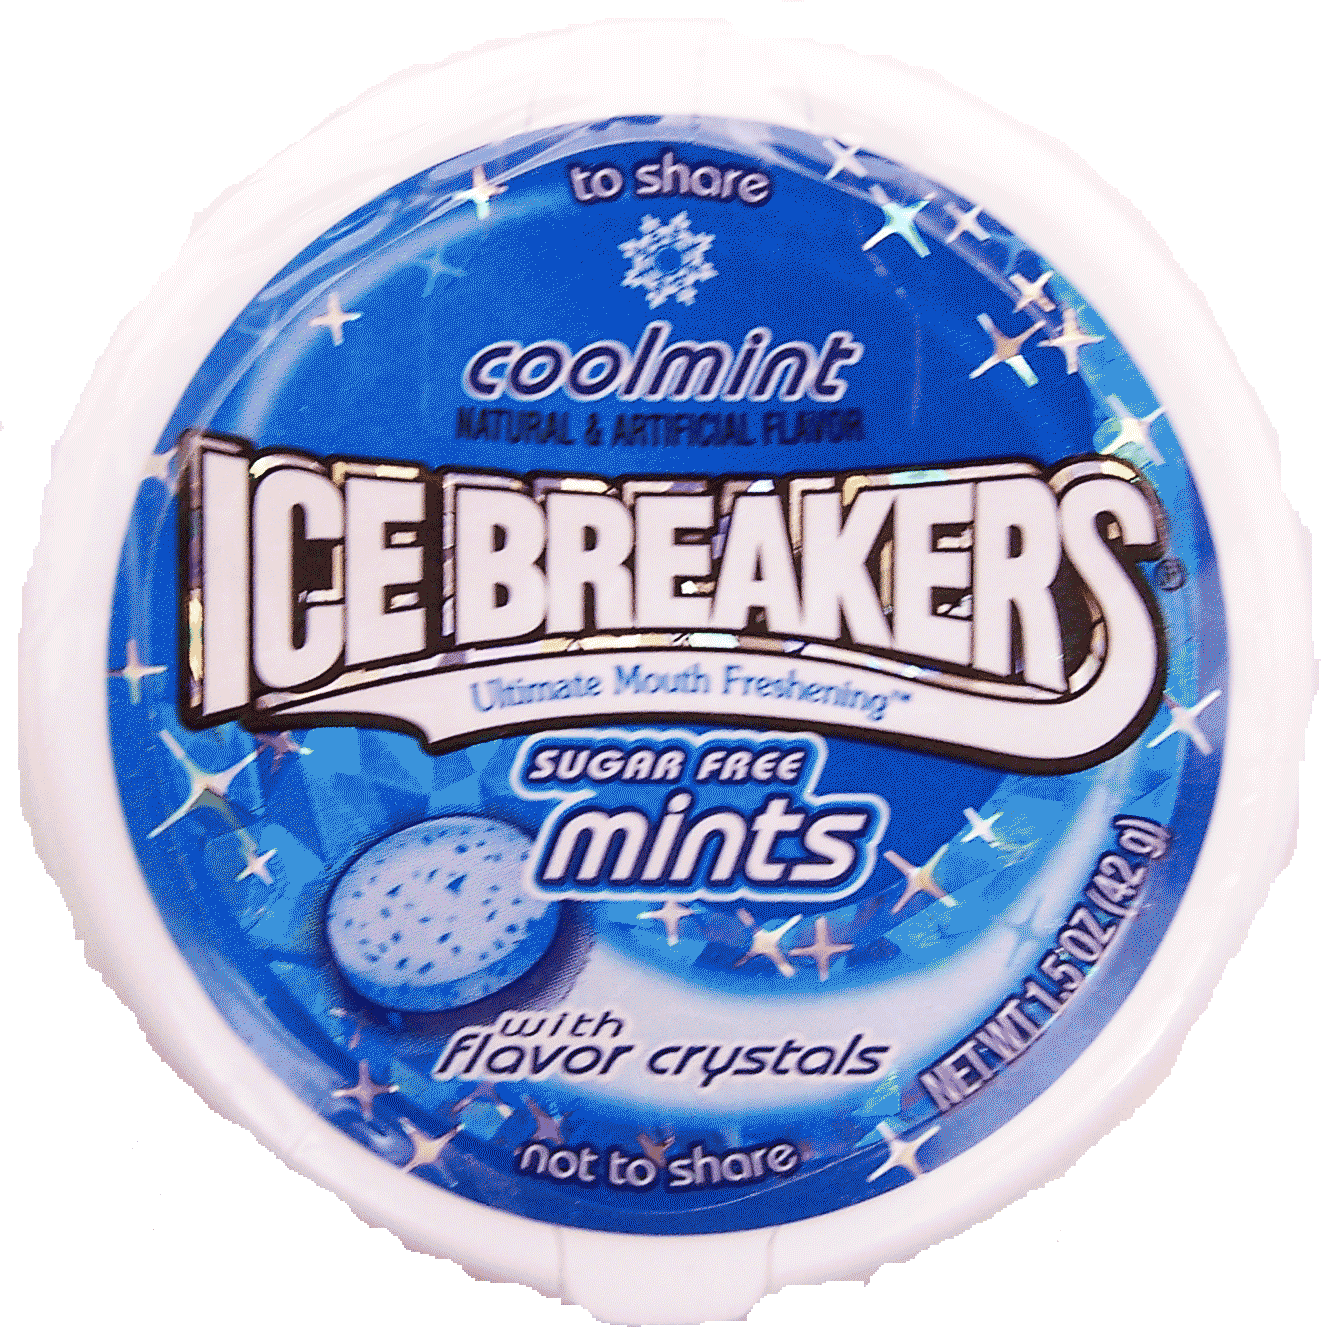 Ice Breakers  sugar free ultimate breath freshening mints cool mint flavor with flavor crystals Full-Size Picture